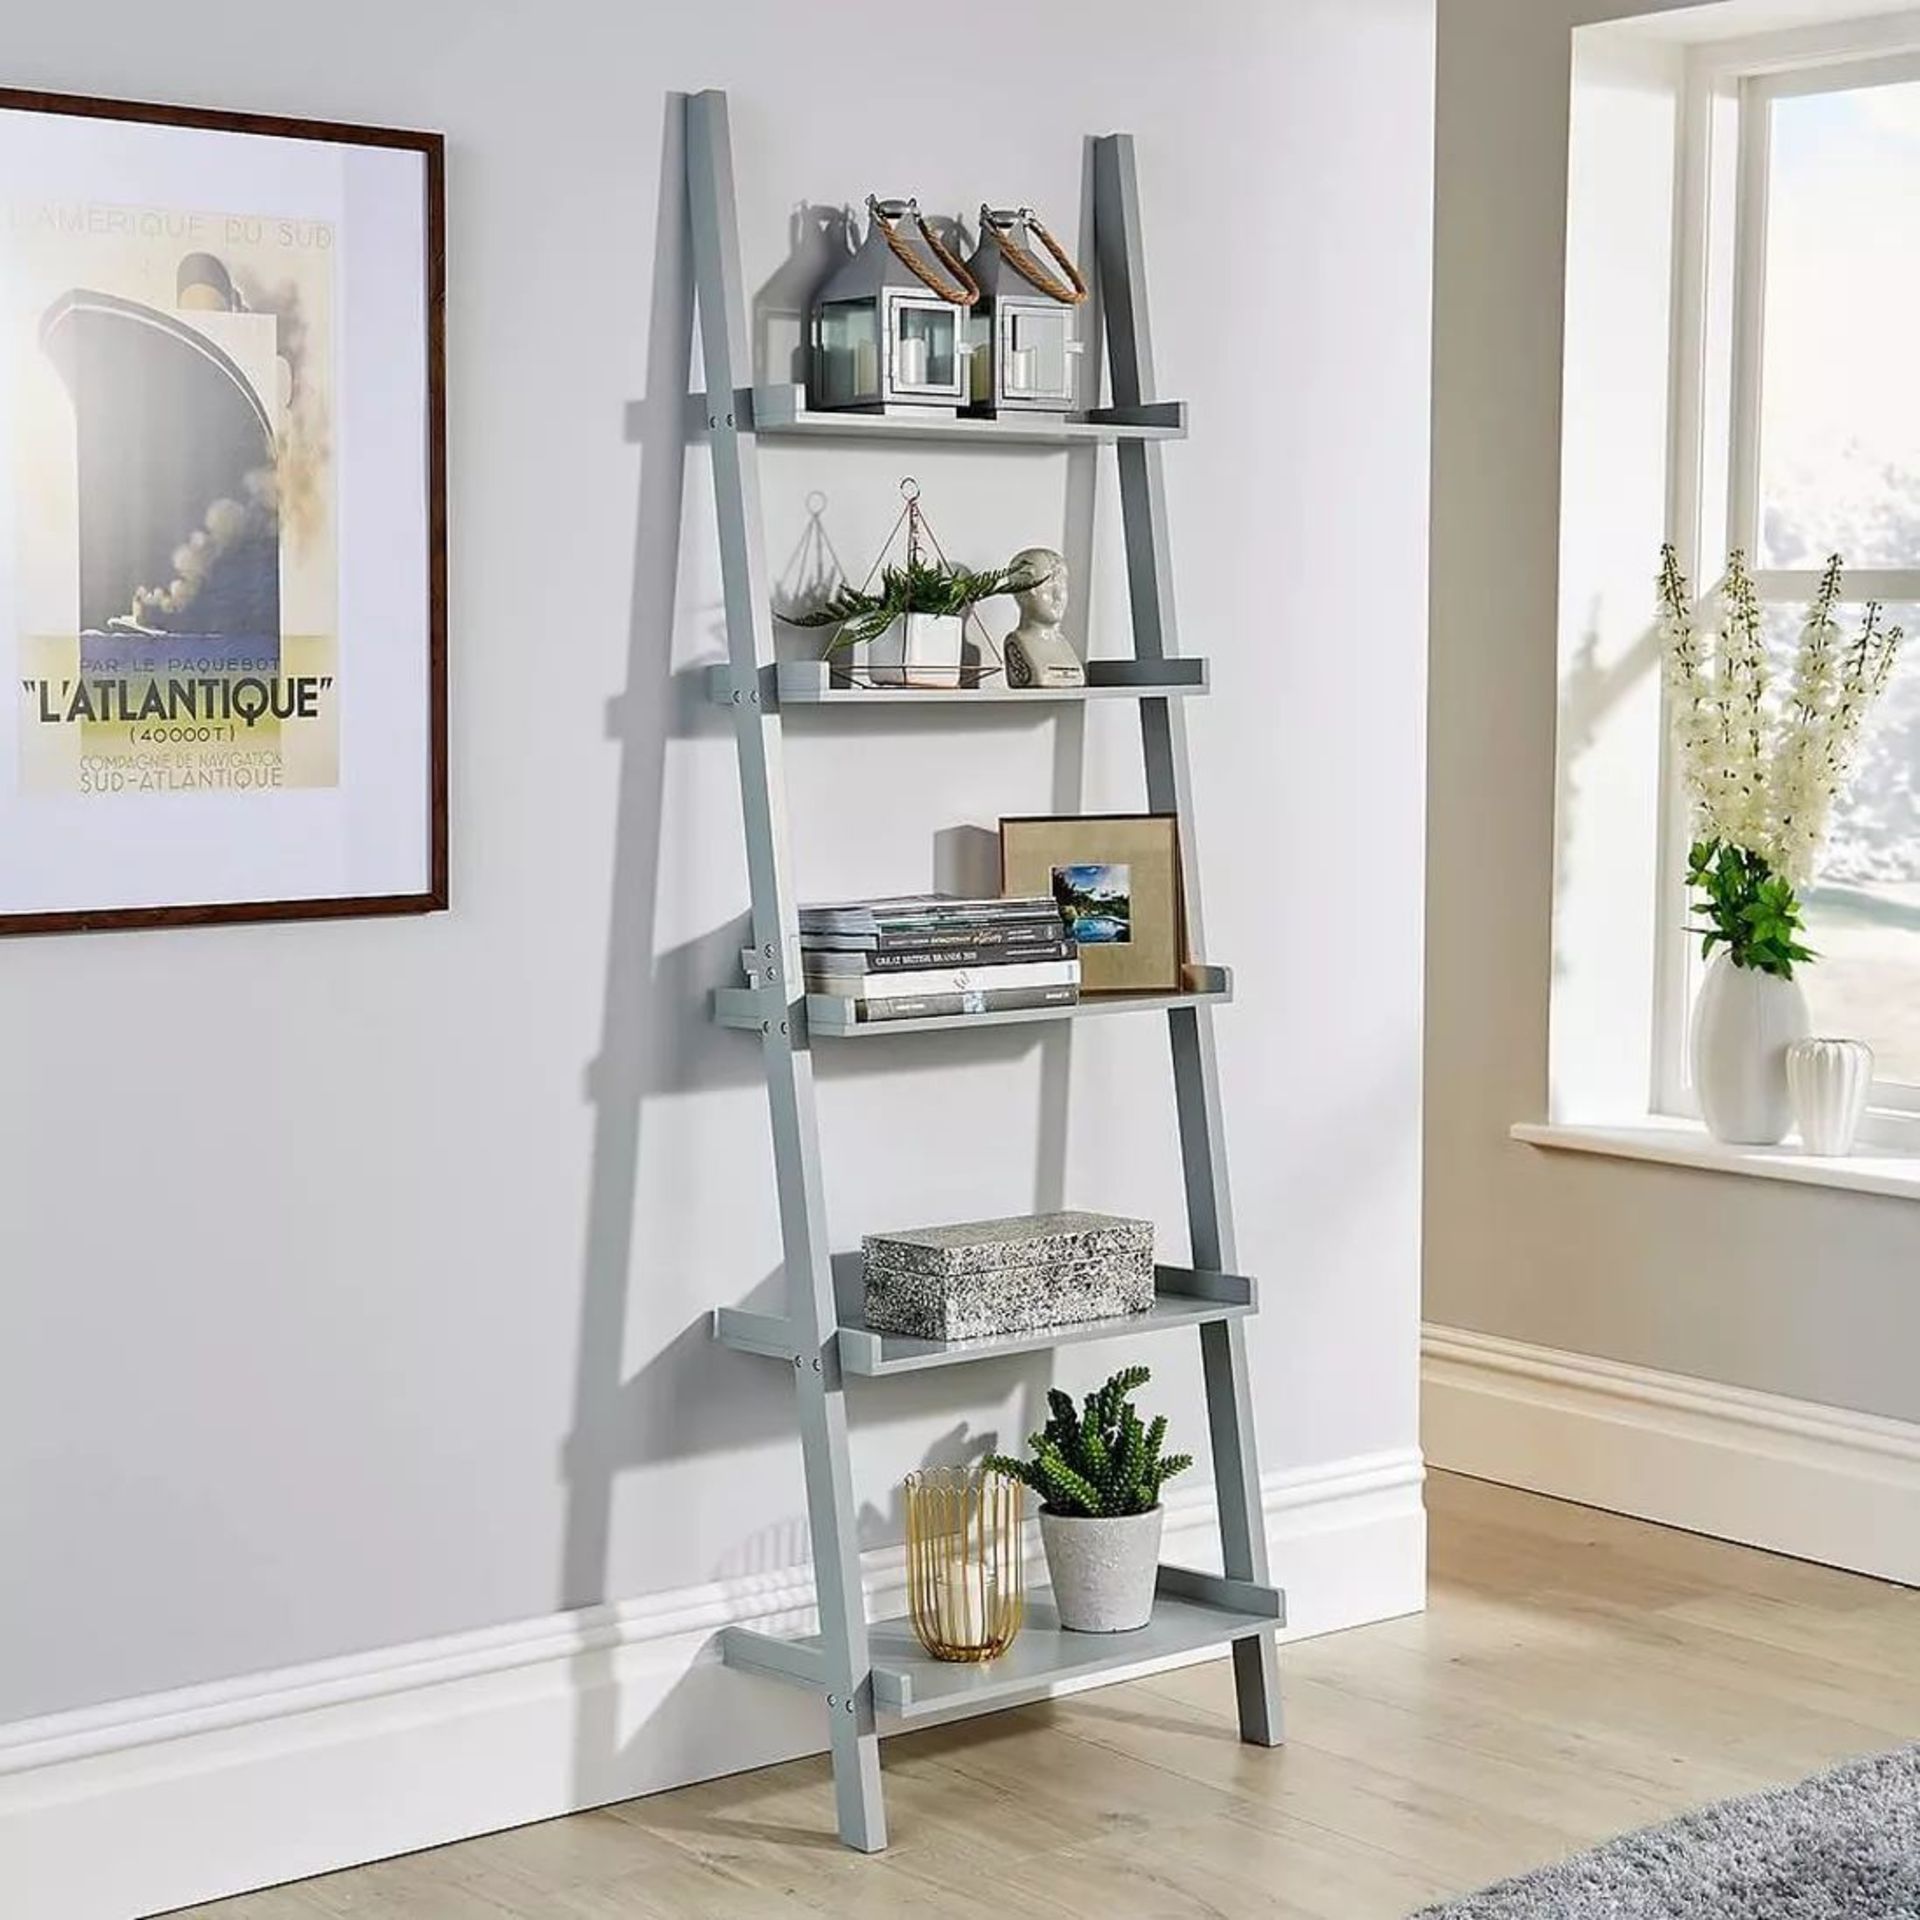 HOME SOURCE 5-Tier Ladder Shelf Storage Unit. - R13a.7. Our range of Ladder Five Tier Fashionable - Image 2 of 2